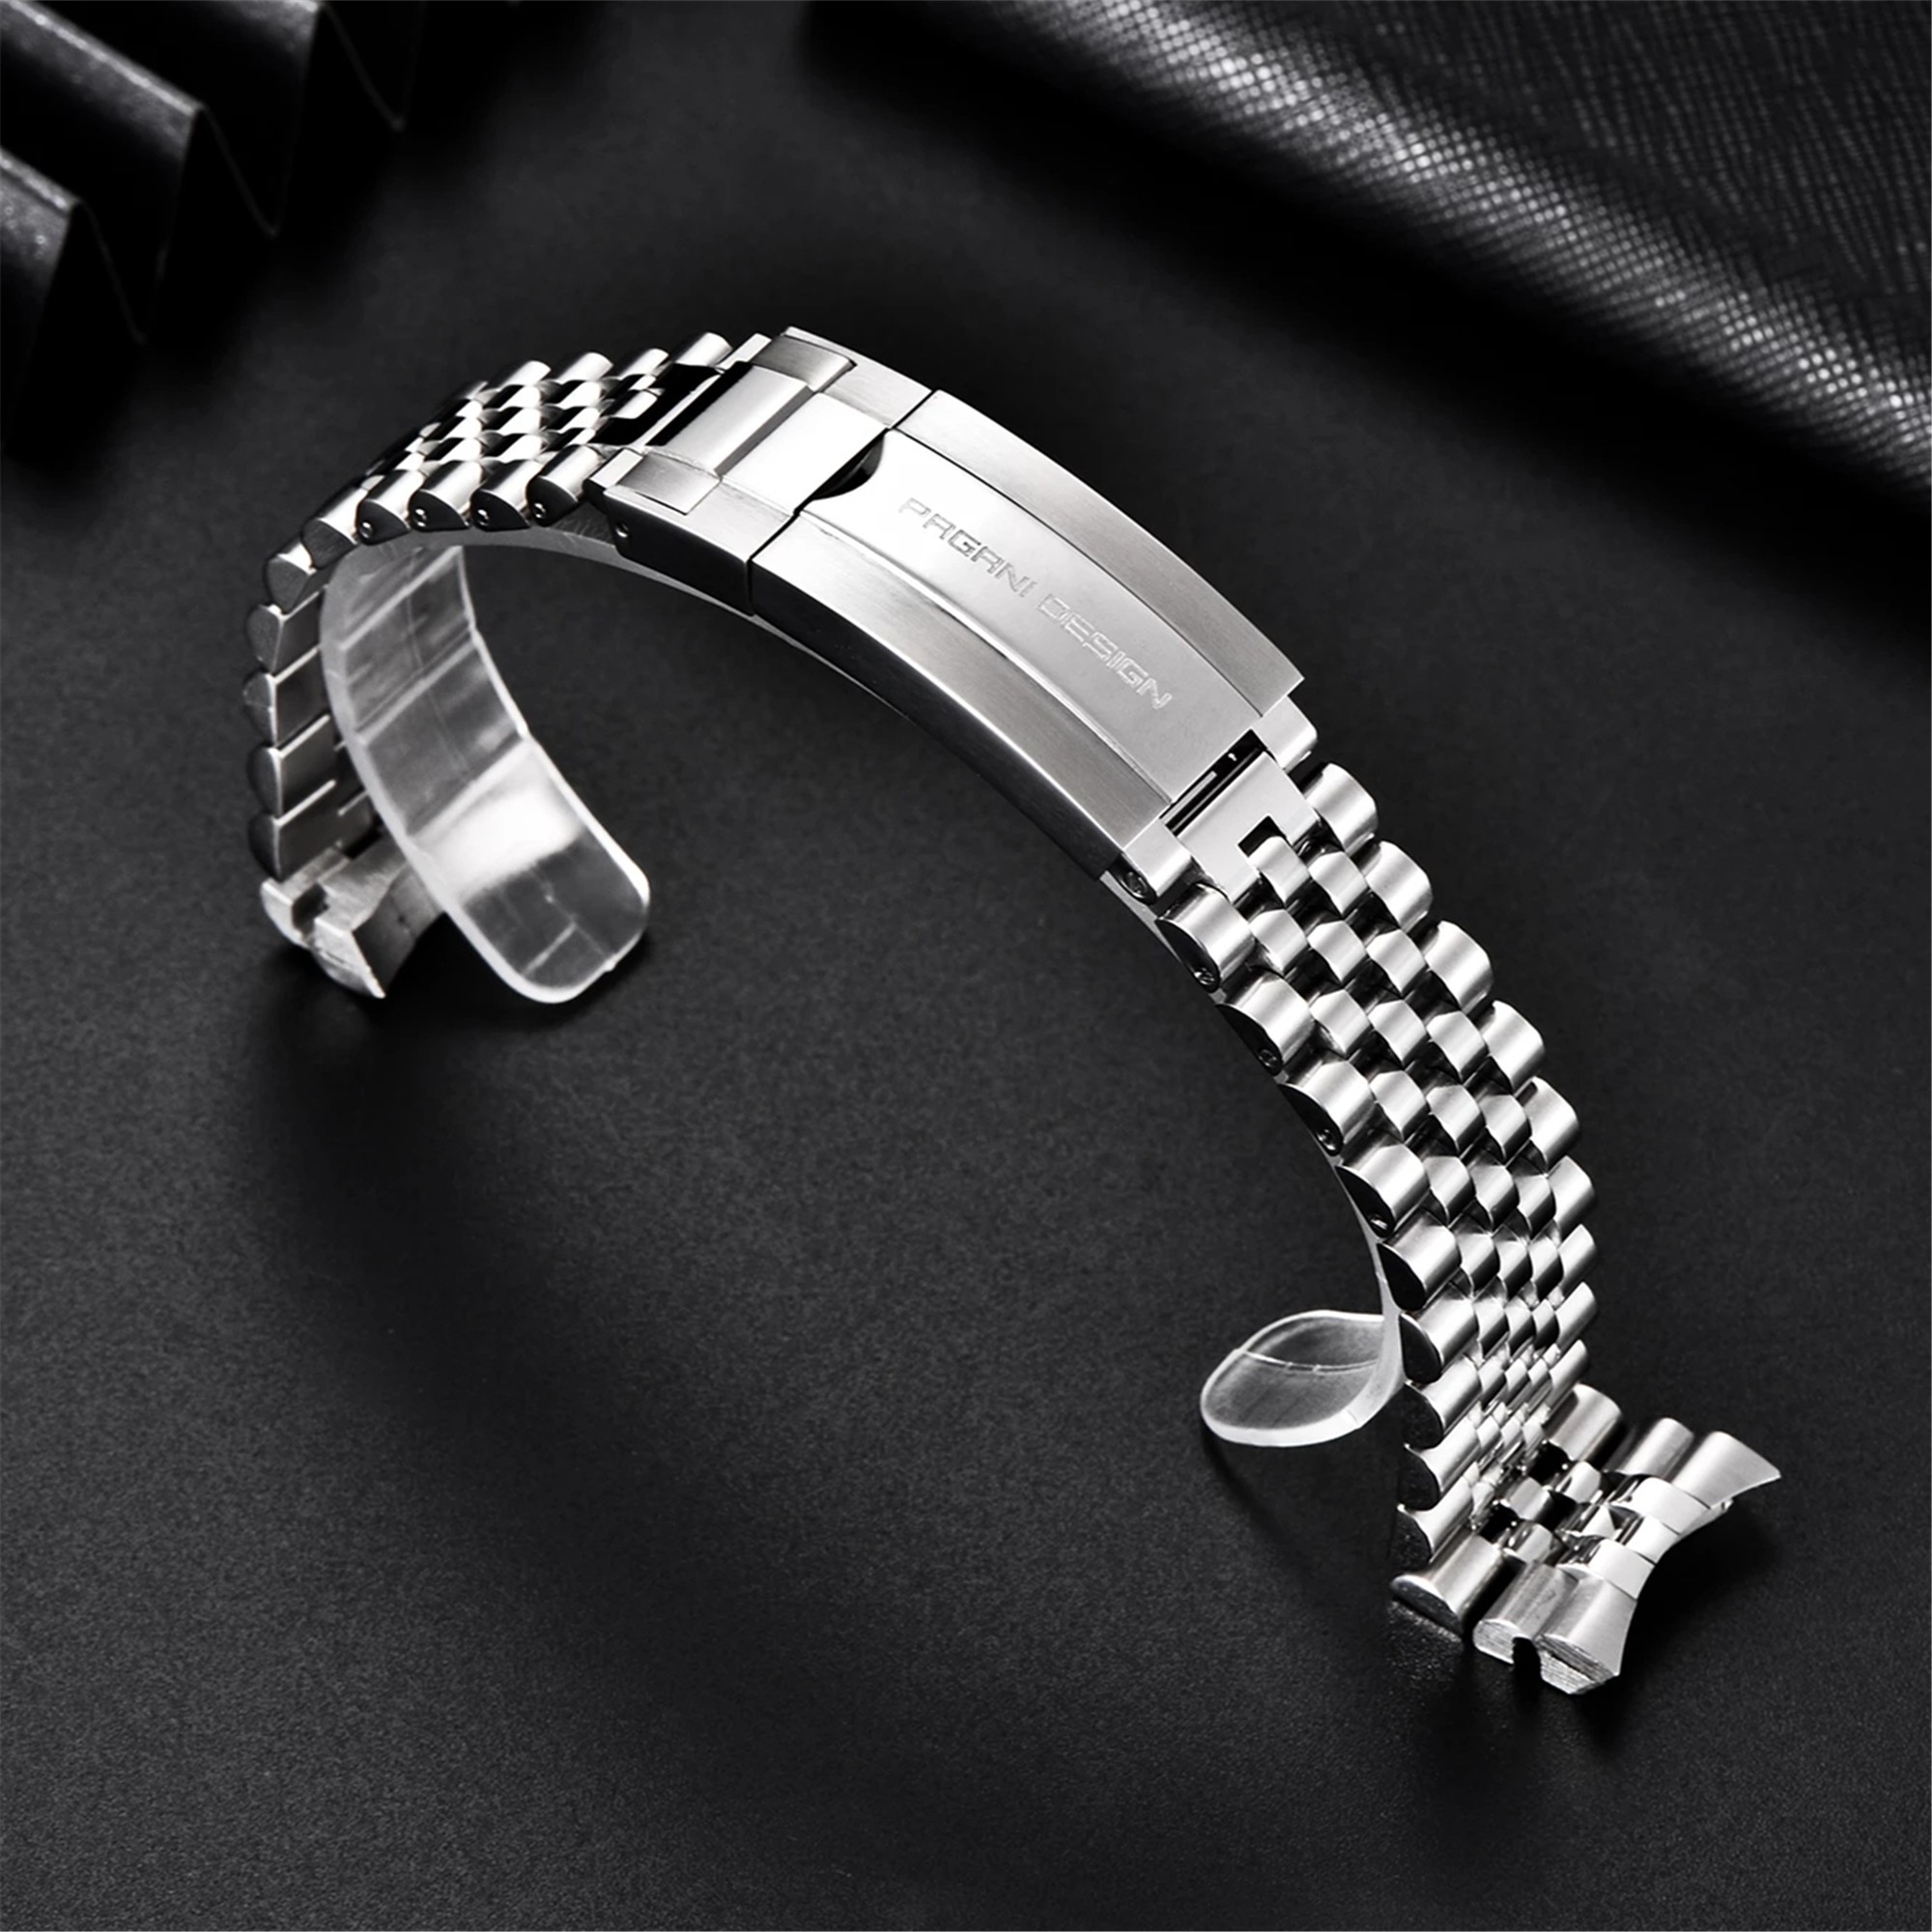 PAGANI DESIGN Original For PD1661,PD1662.PD1651 Watch 316L Stainless Steel Band Jubilee Band Bracelet Width 20mm, Length 220mm